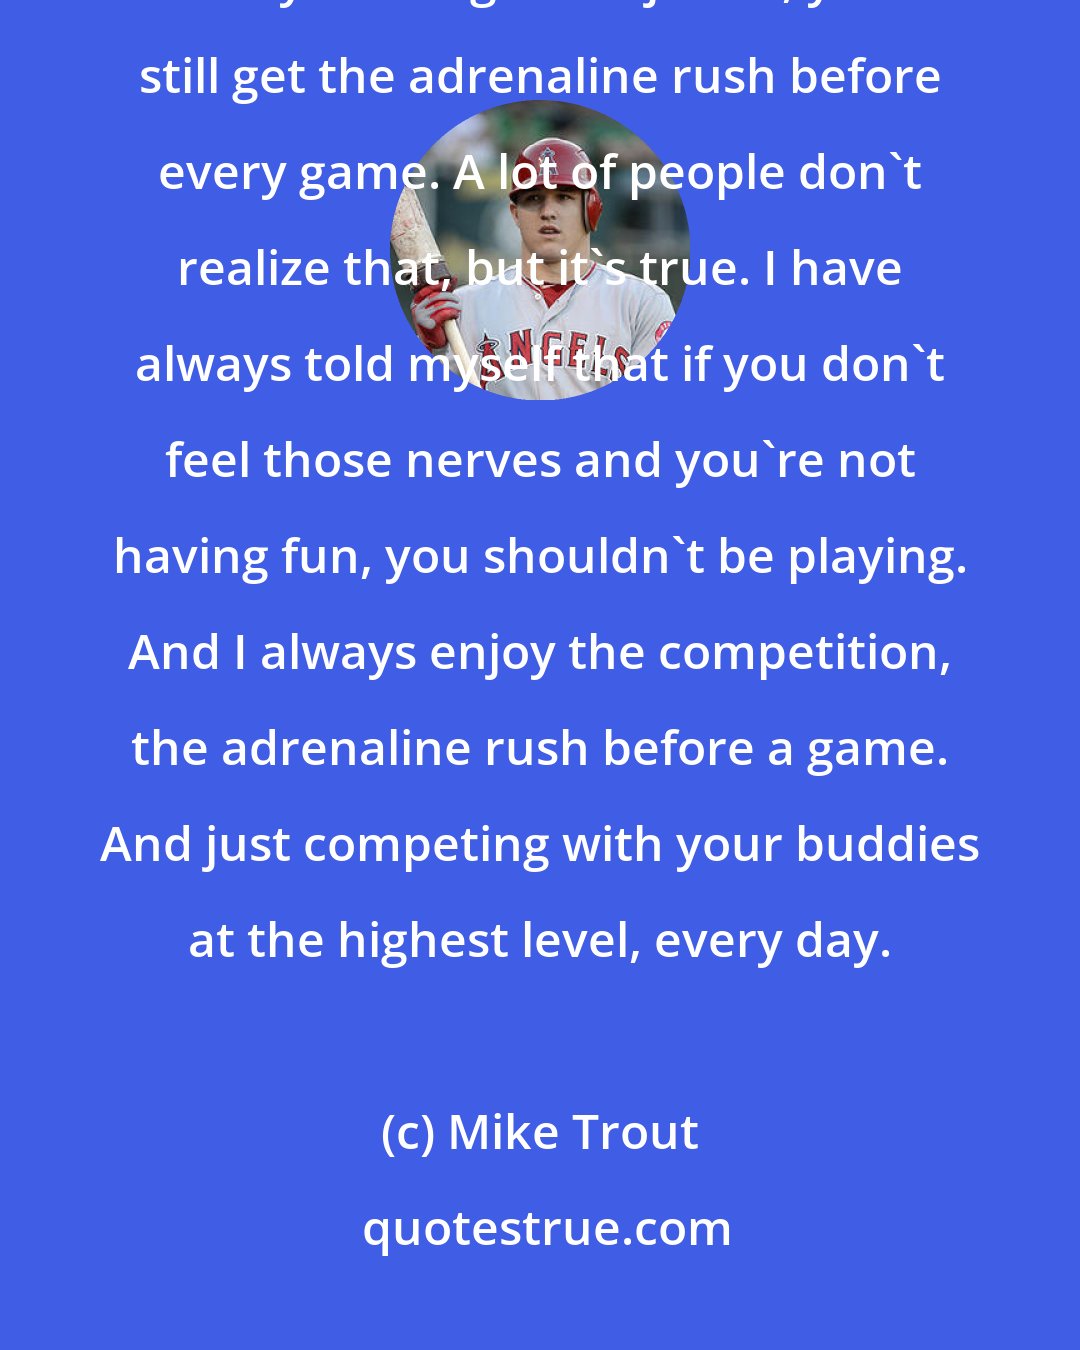 Mike Trout: The first professional game of your career is obviously the biggest, but you still get the jitters, you still get the adrenaline rush before every game. A lot of people don't realize that, but it's true. I have always told myself that if you don't feel those nerves and you're not having fun, you shouldn't be playing. And I always enjoy the competition, the adrenaline rush before a game. And just competing with your buddies at the highest level, every day.